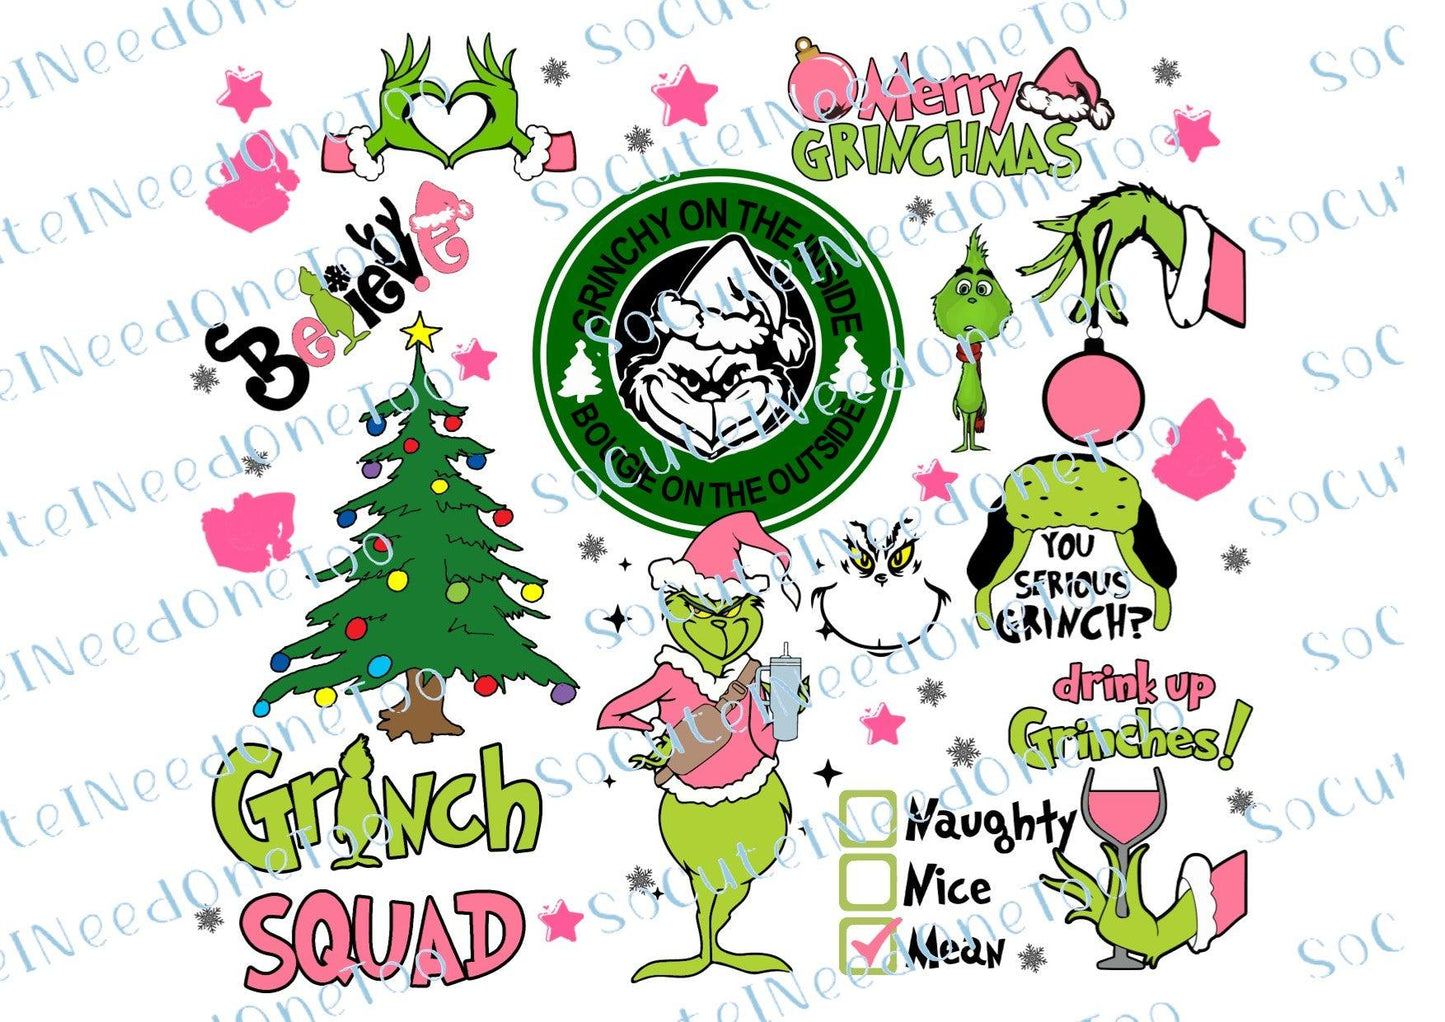 Grinch Christmas Waterslide Wrap Collection A - SoCuteINeedOneToo